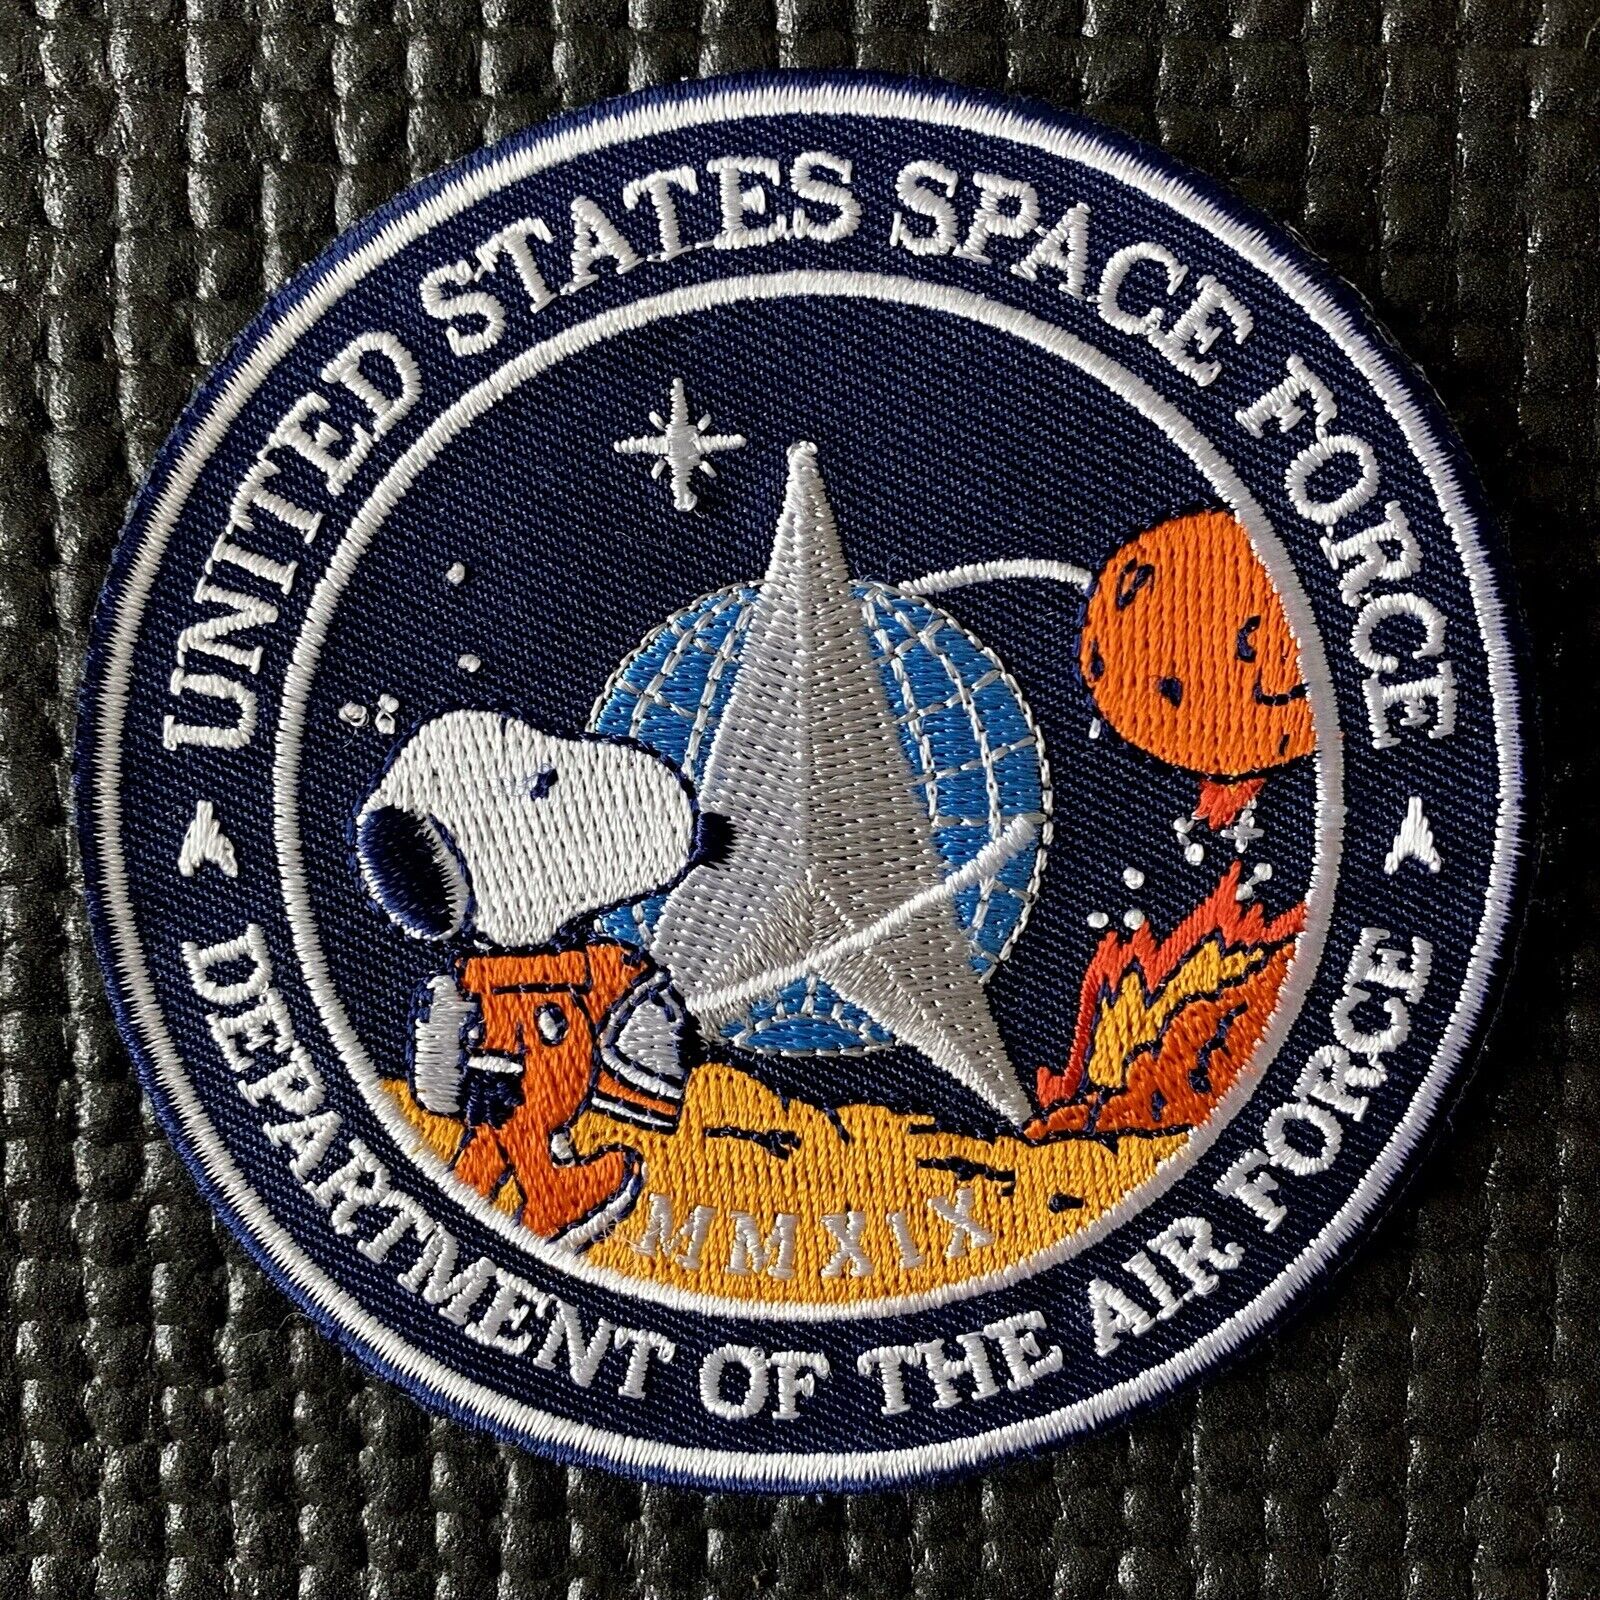 US SPACE FORCE PATCH - NASA SPACEX MARS CAMPAIGN - 3.5”